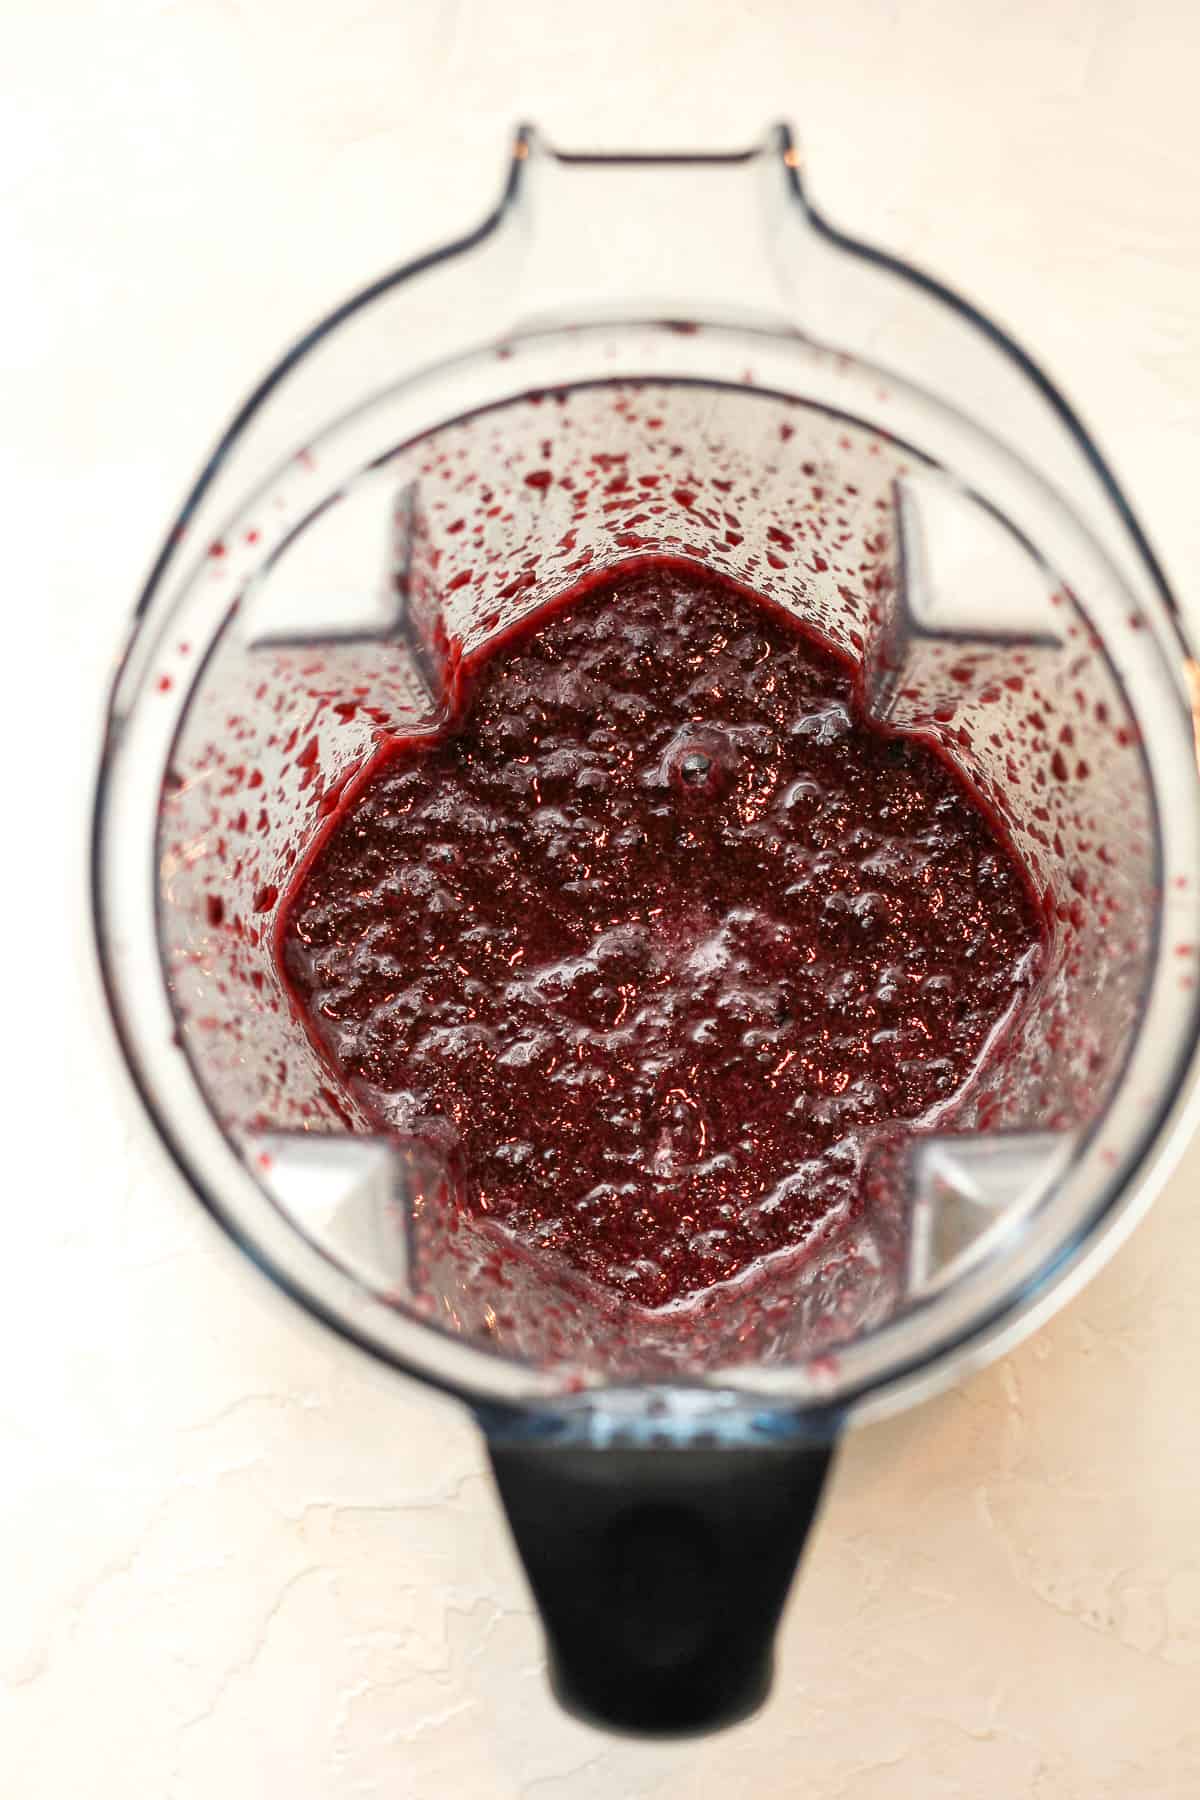 A blender with the pureed cherries.